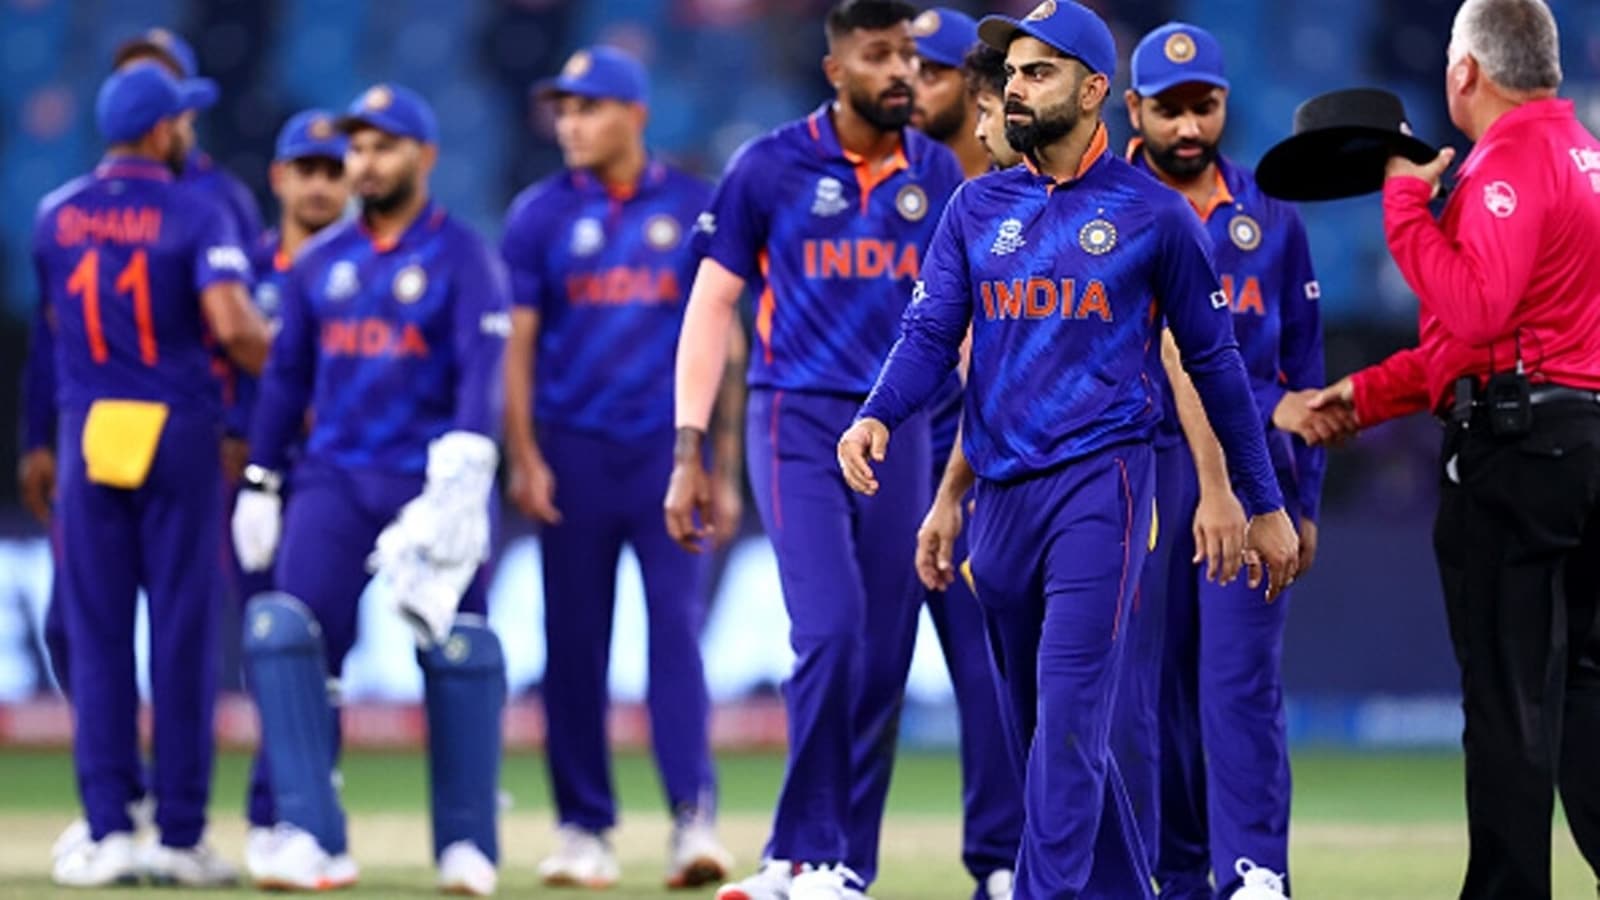 IND vs AFG, T20 World Cup 2021 Live Streaming When and where to watch India vs Afghanistan Super 12 game Live Online, TV Cricket